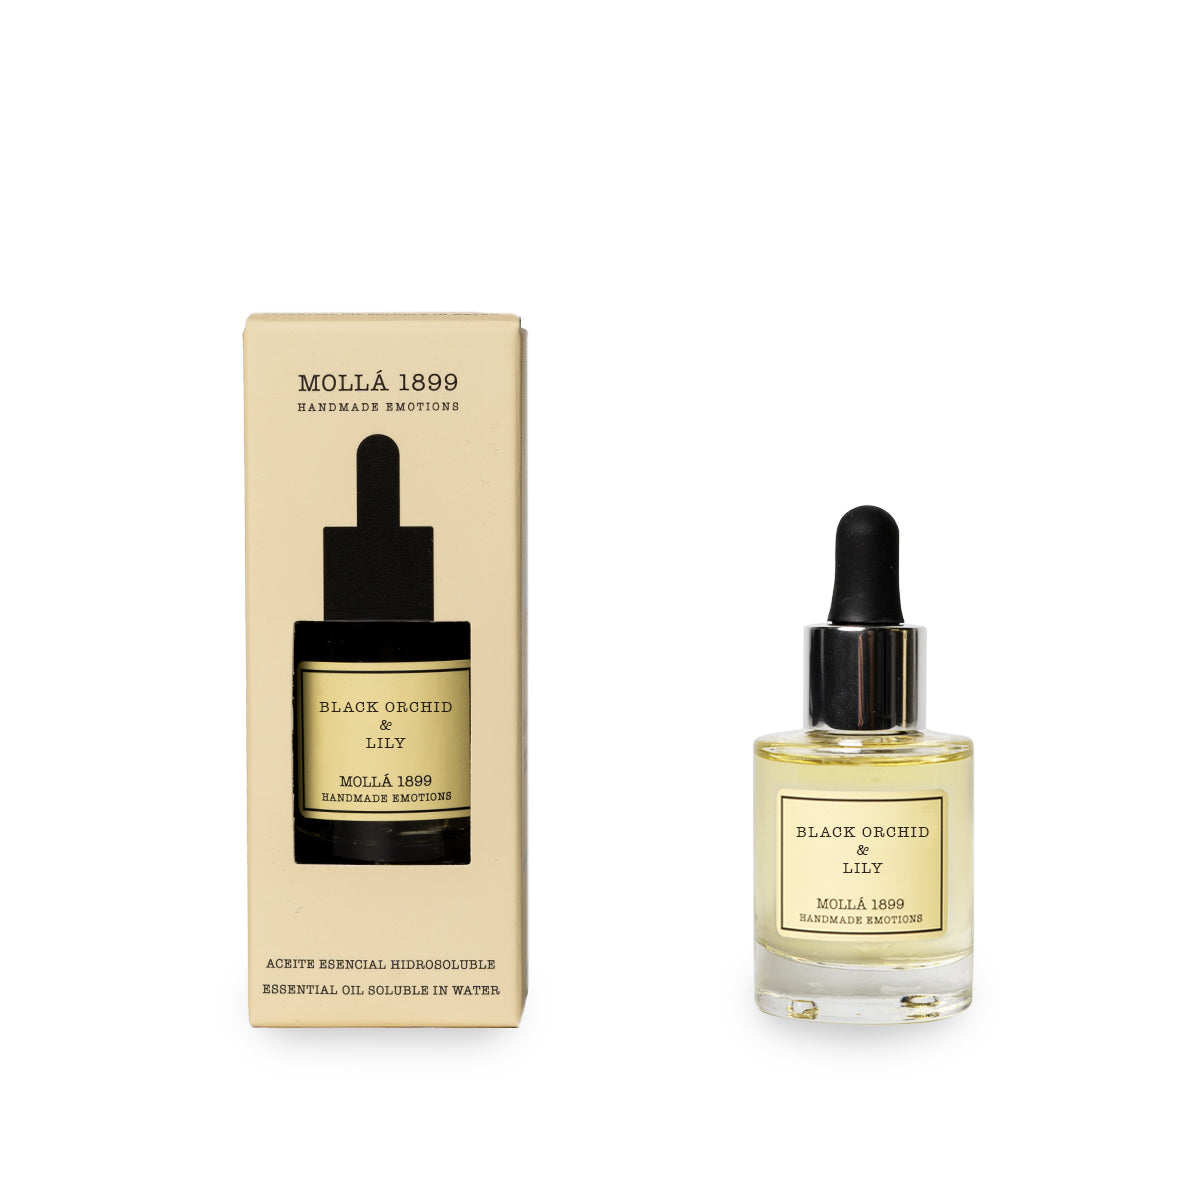 Aceite Esencial Hidrosoluble 30 ml Black Orchid & Lily